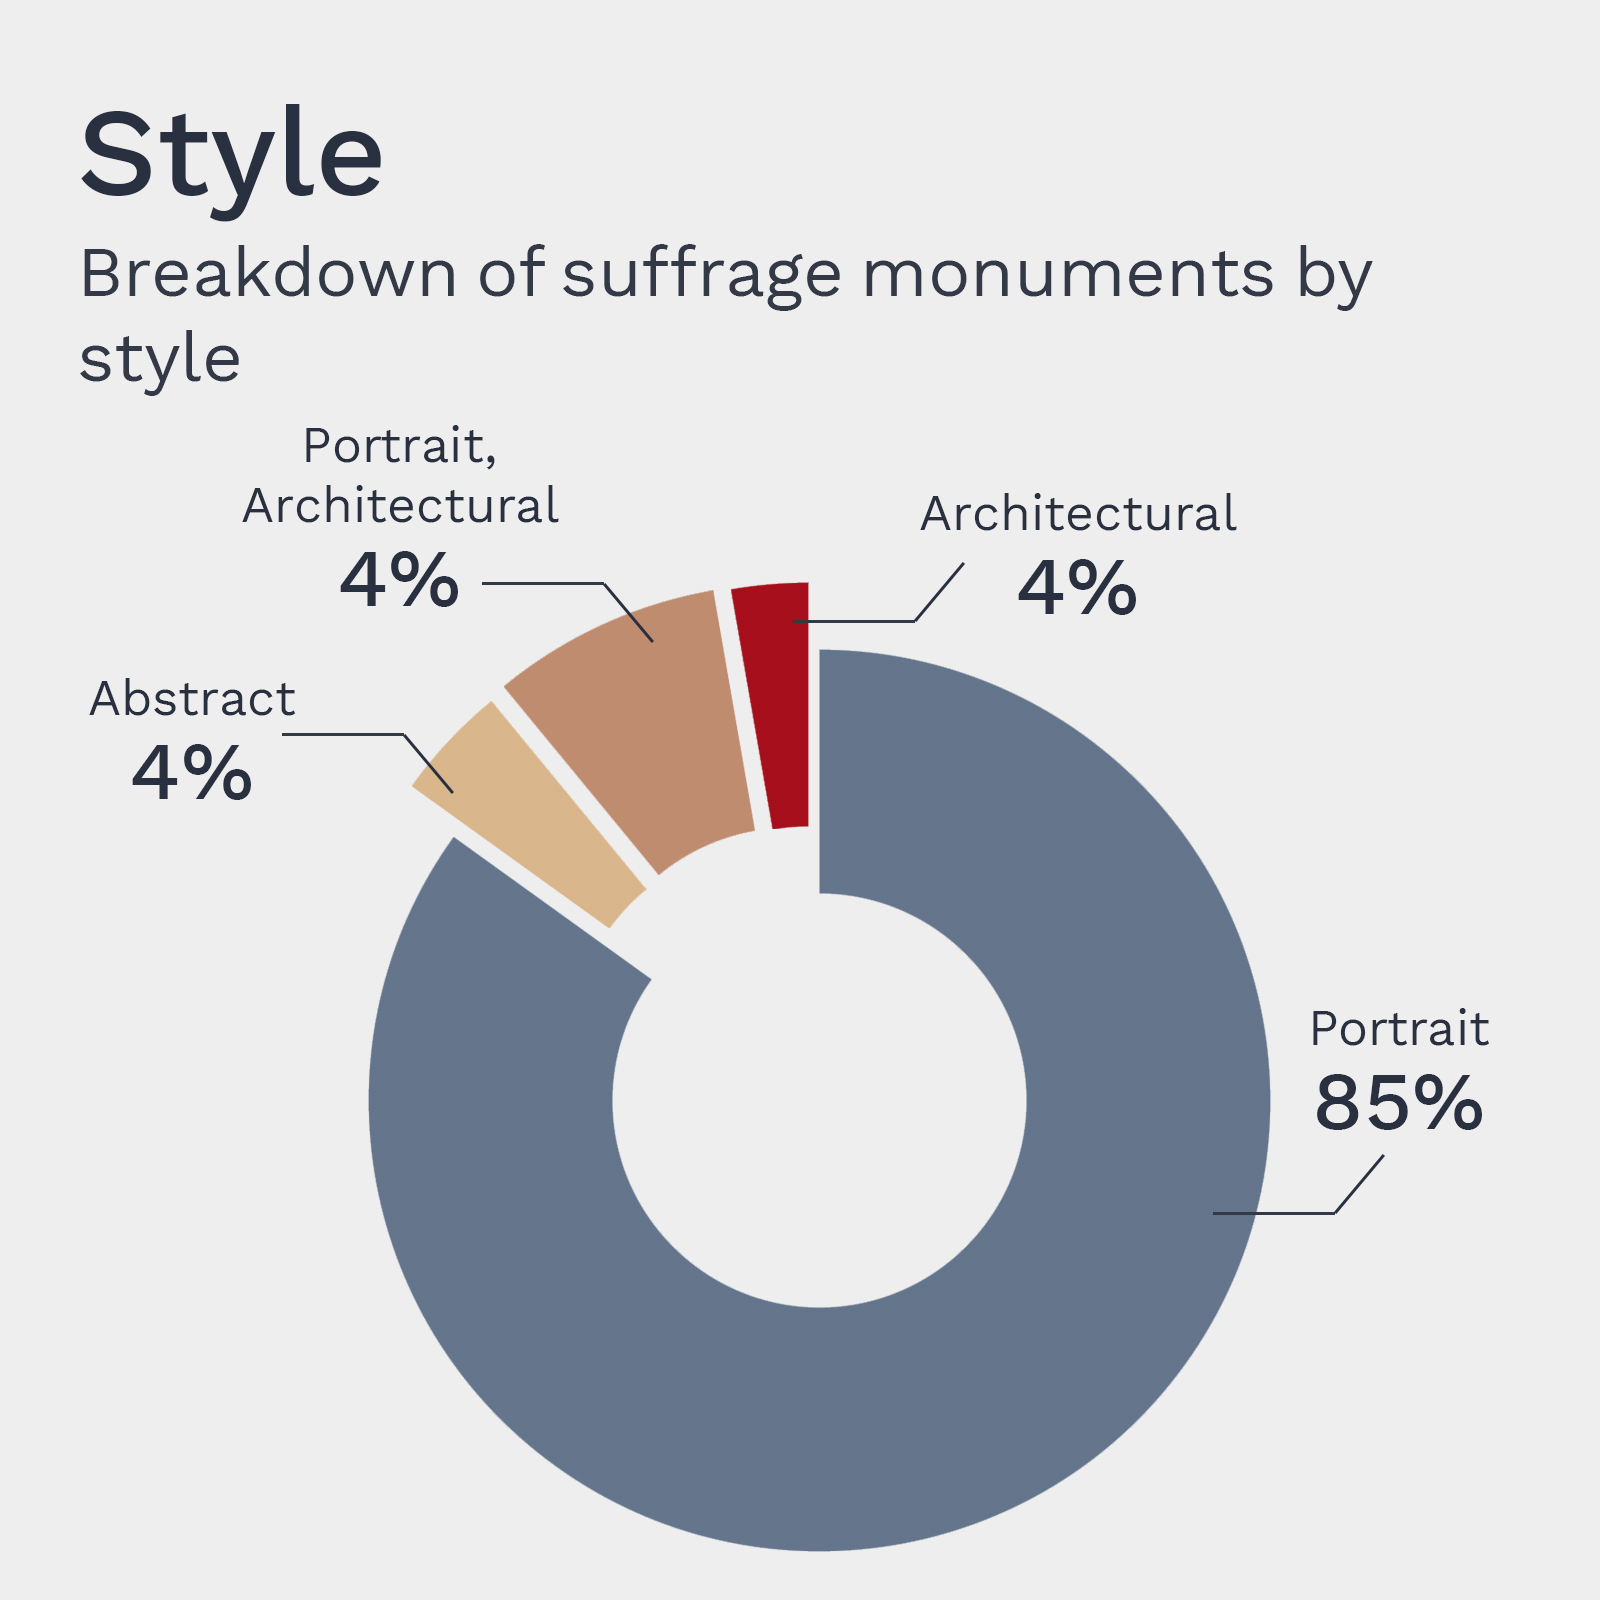 Pie chart showing the styles of suffrage monuments in the United States. 85% are portraits.